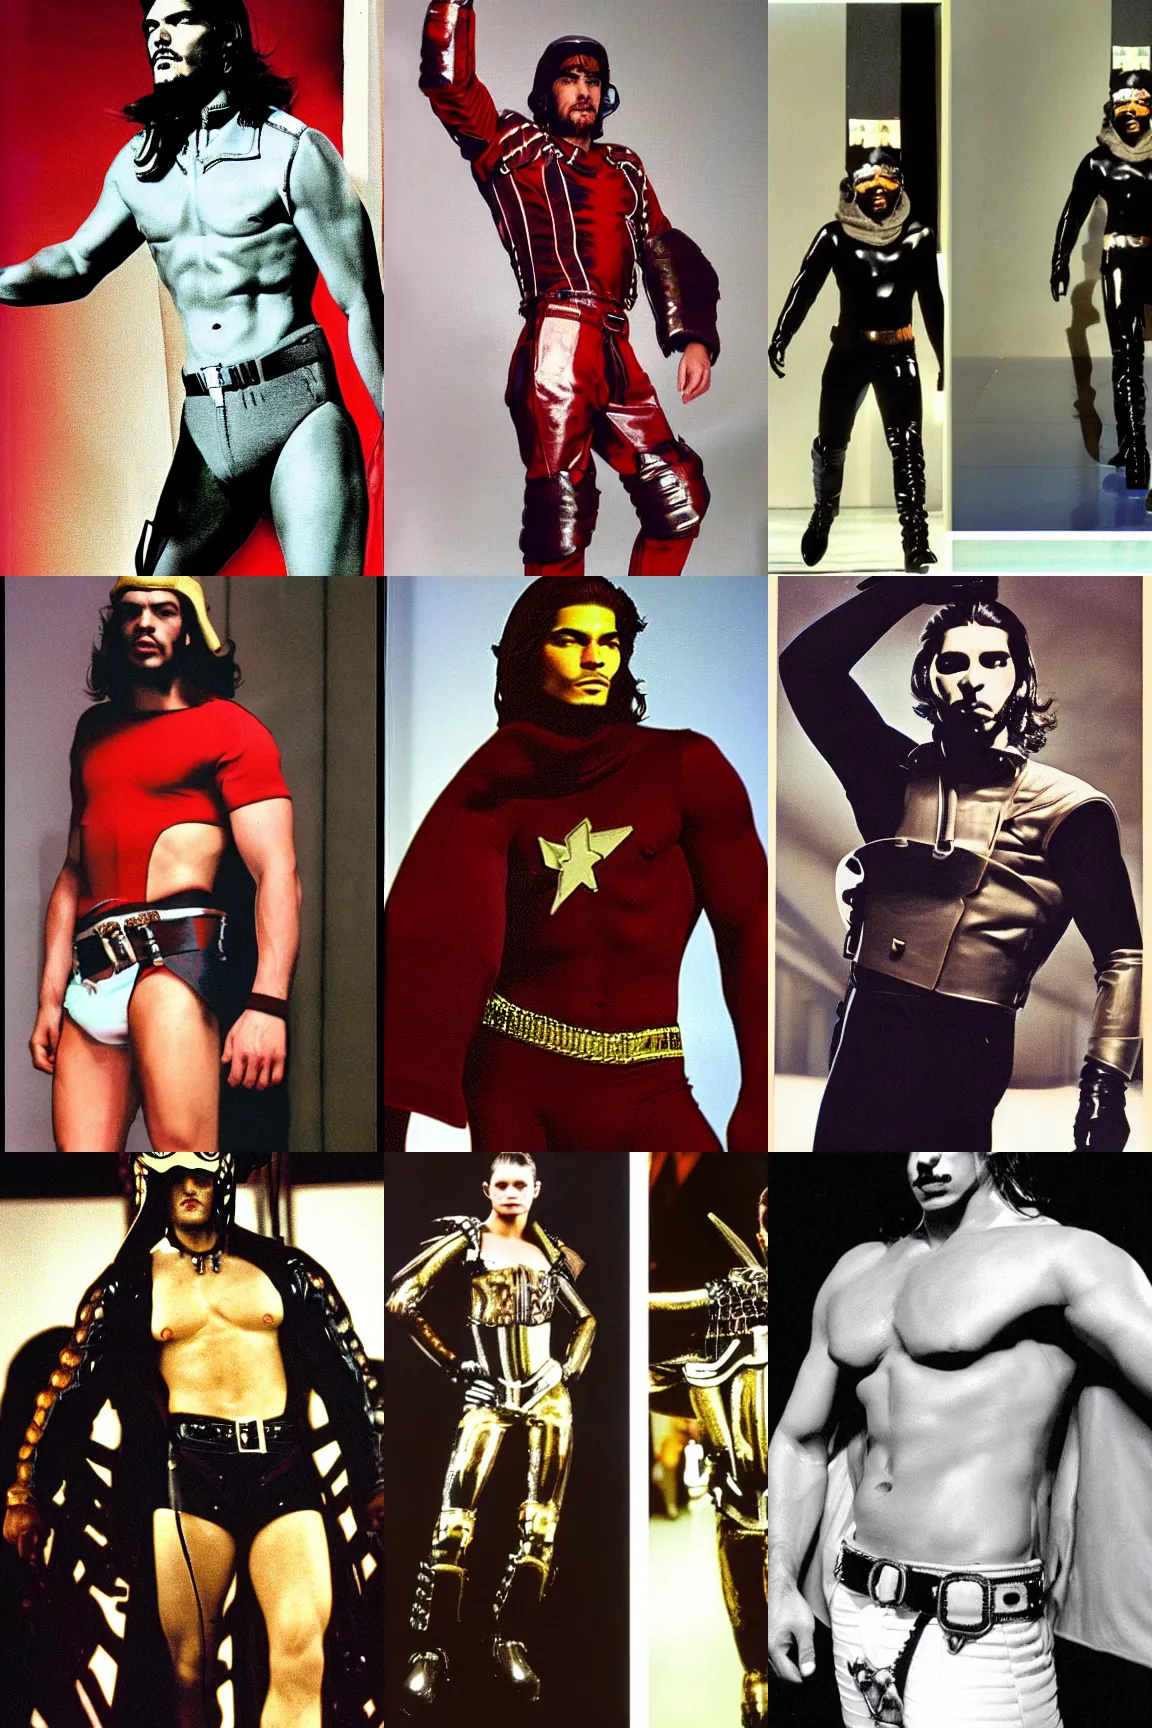 Prompt: buff Che Guevara in La Chimère armor by Thierry Mugler Autumn/Winter 1997-1998